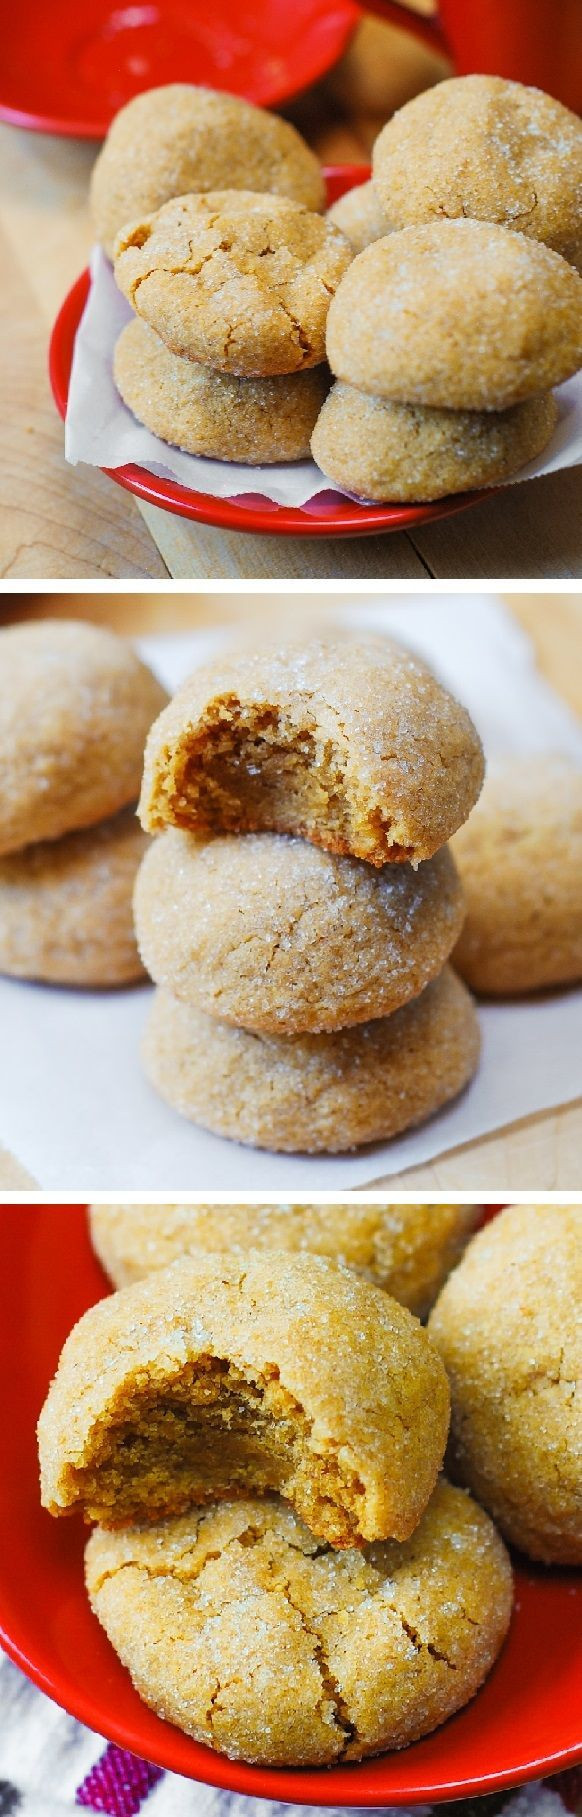 Best Peanut Butter Cookies
 The best and easy peanut butter cookies